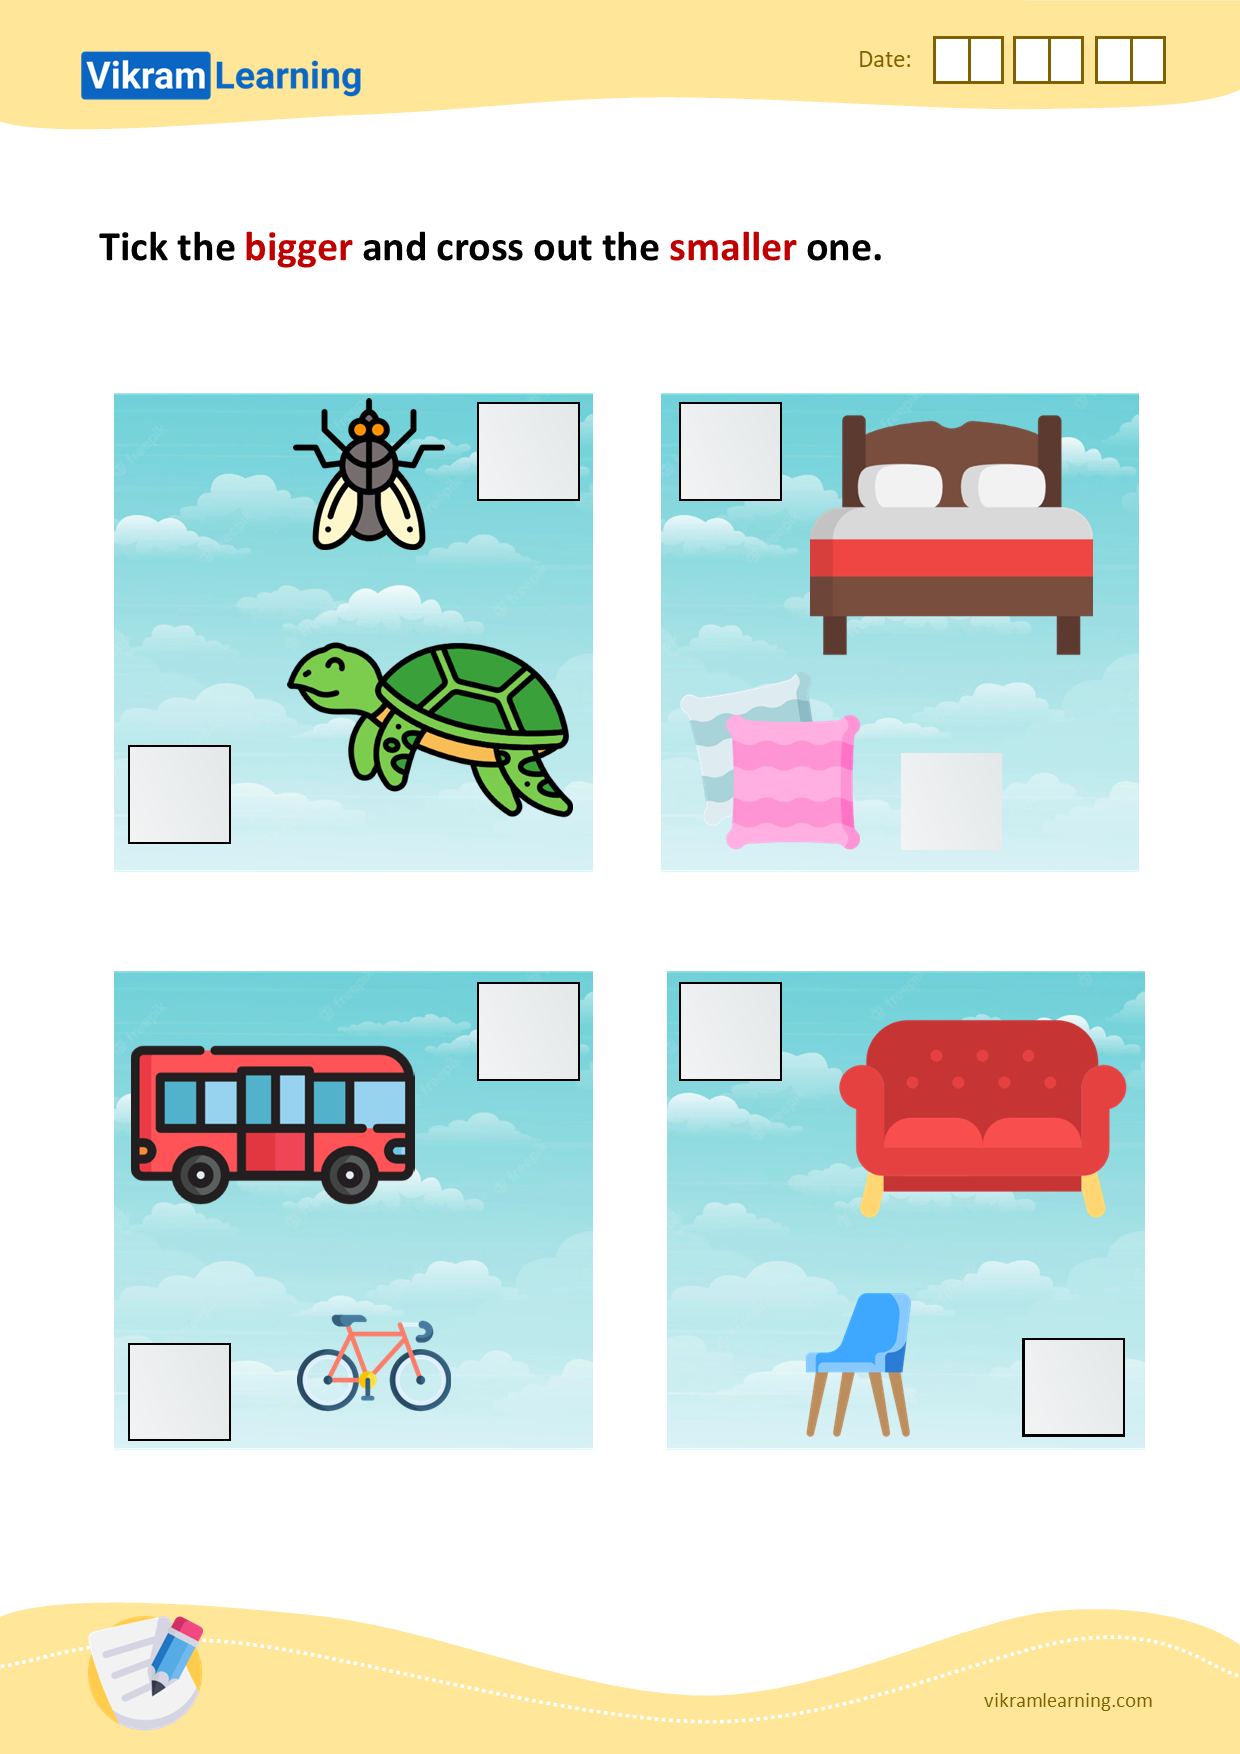 Download tick the bigger one and cross out the smaller one - 3 worksheets